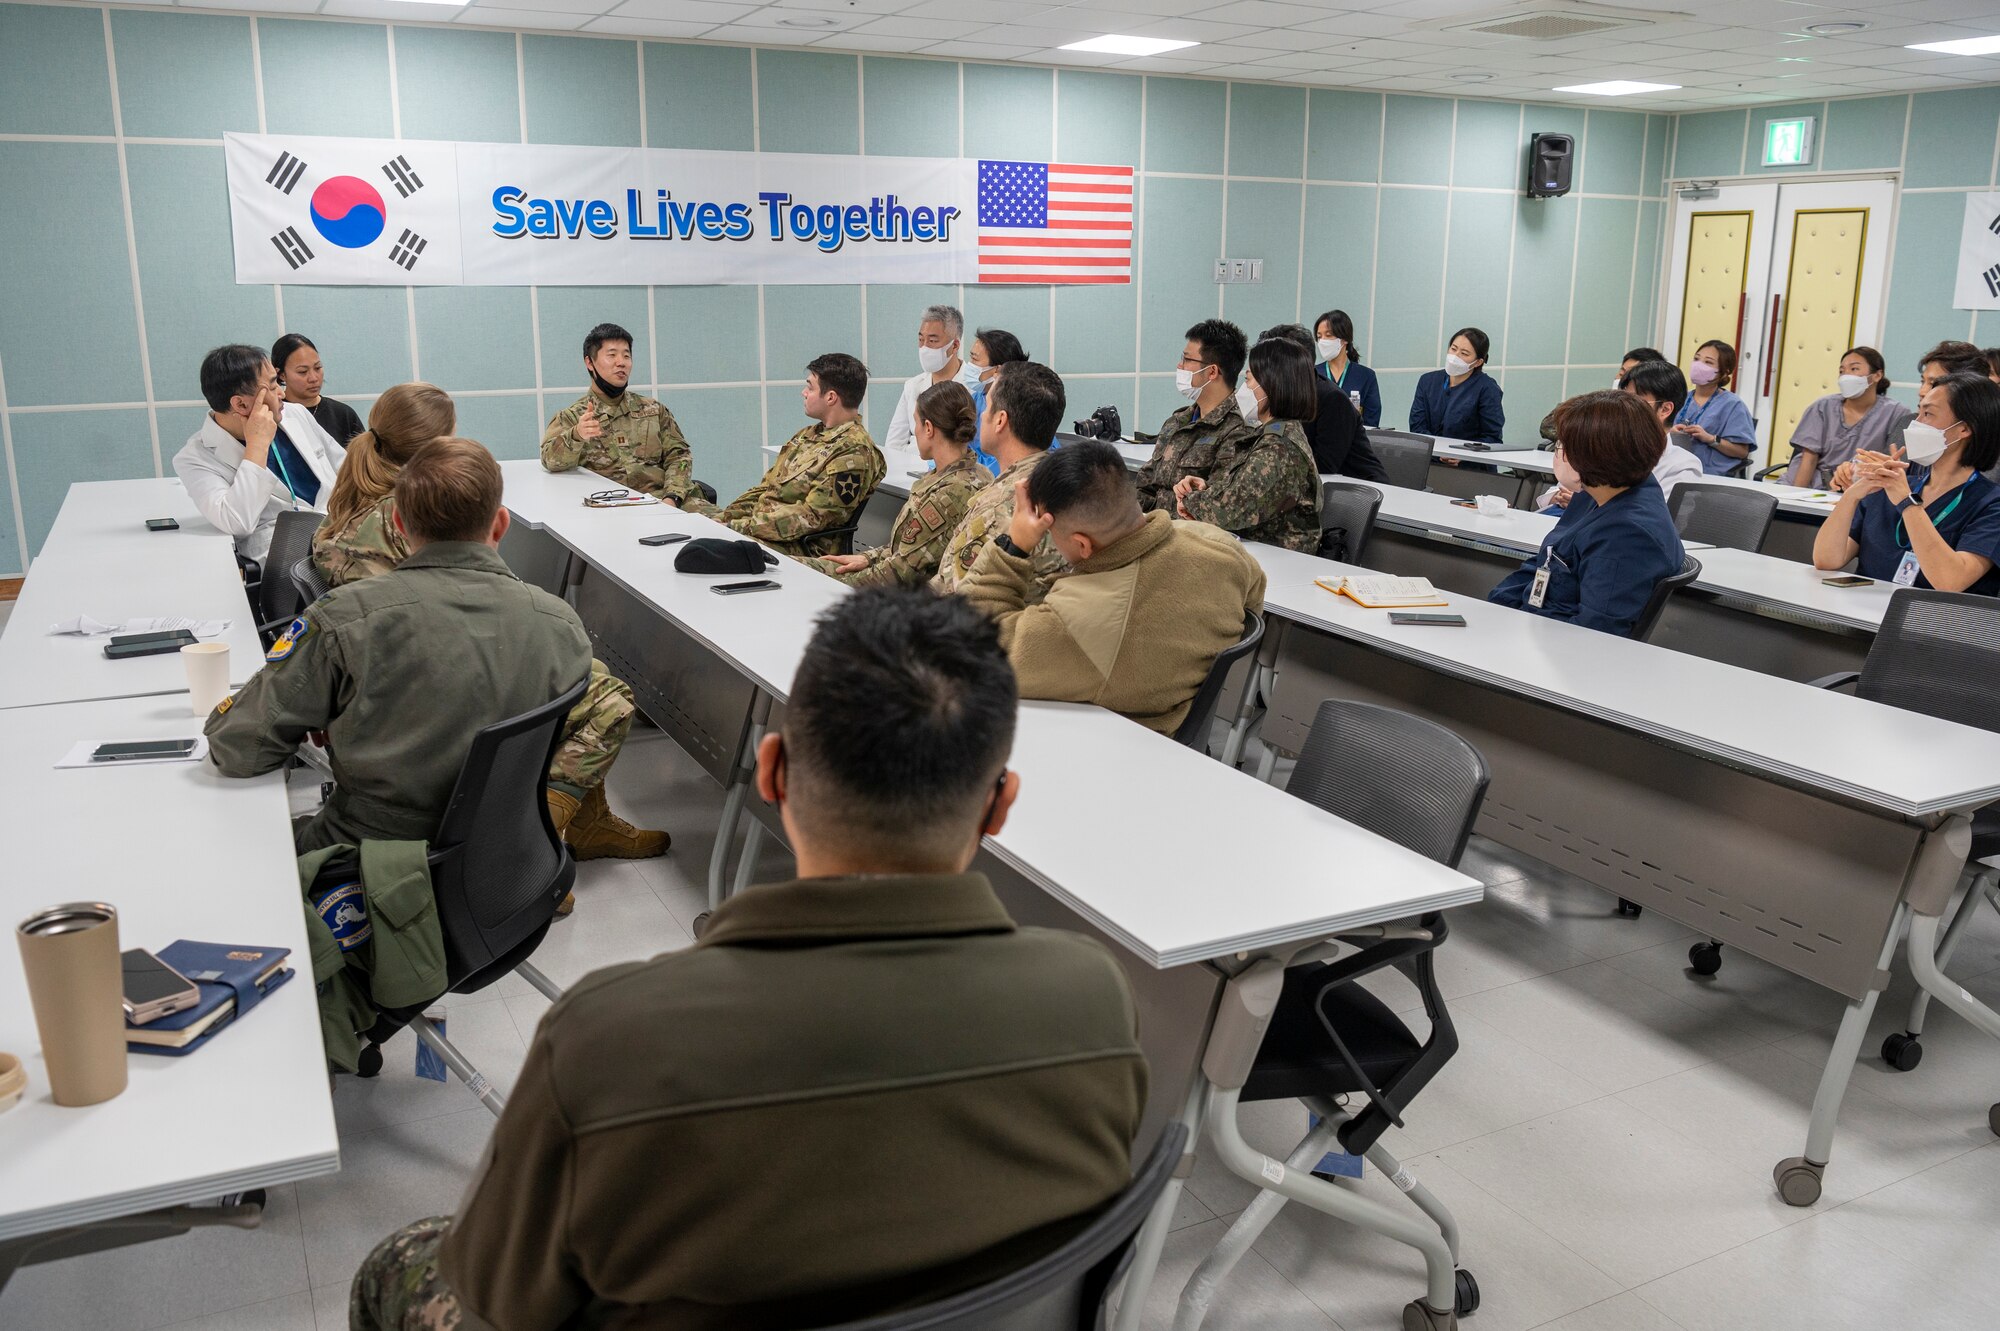 51st Medical Group personnel and Republic of Korea Armed Forces Trauma Center (AFTC) personnel debrief after the joint trauma training event at the AFTC, Republic of Korea, Feb. 28, 2023. The 51st MDG and AFTC personnel discussed obstacles encountered during the training event and how the teams can improve. (U.S. Air Force photo by Airman 1st Class Aaron Edwards)